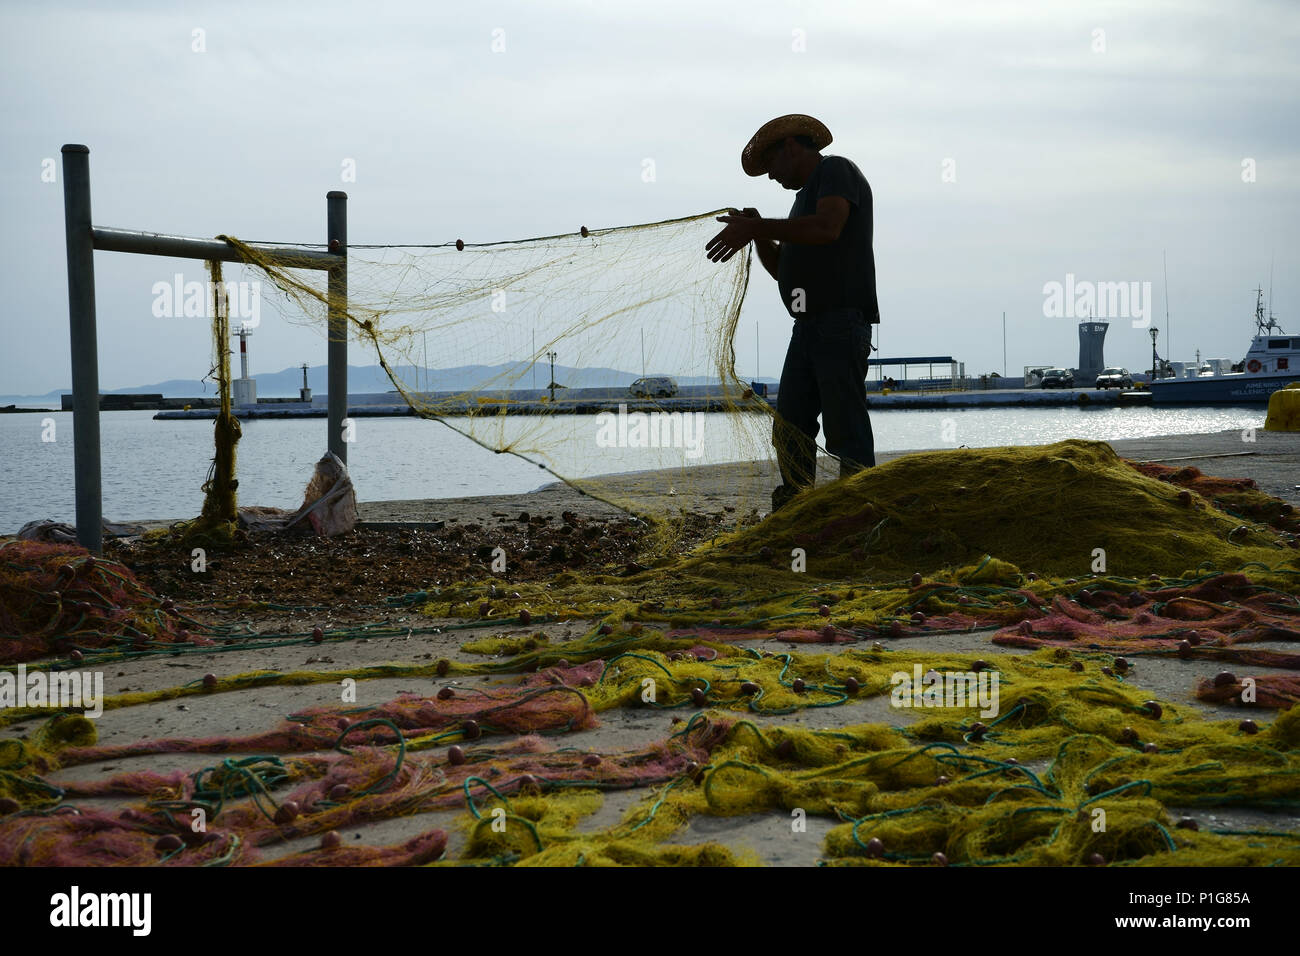 Fisherman cleaning his nets at dock in Tinos, Cyclades islands, Greece Stock Photo